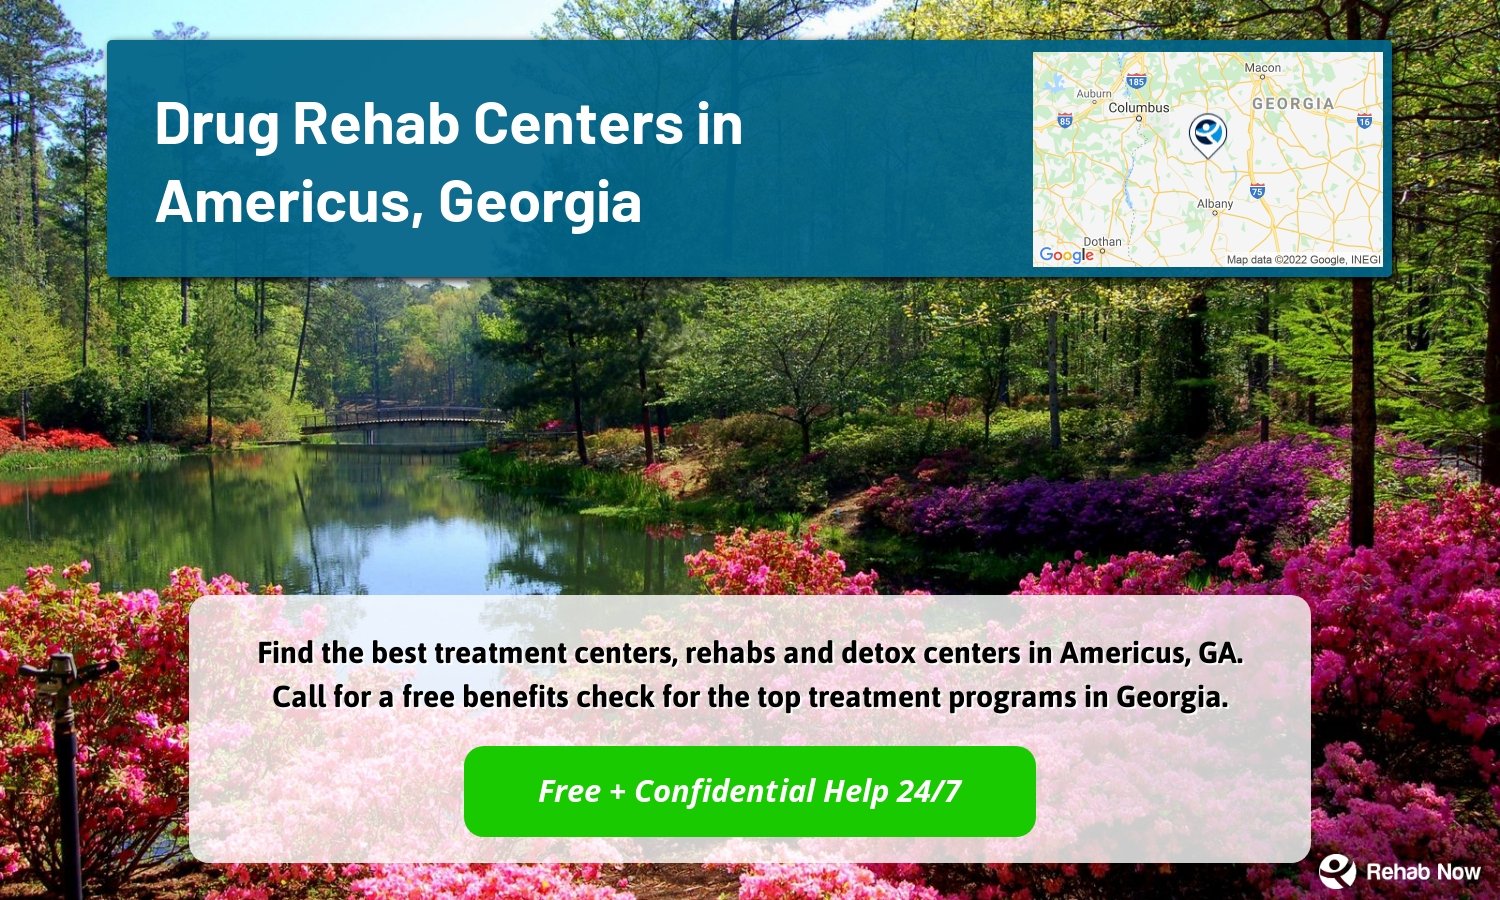 Find the best treatment centers, rehabs and detox centers in Americus, GA. Call for a free benefits check for the top treatment programs in Georgia.